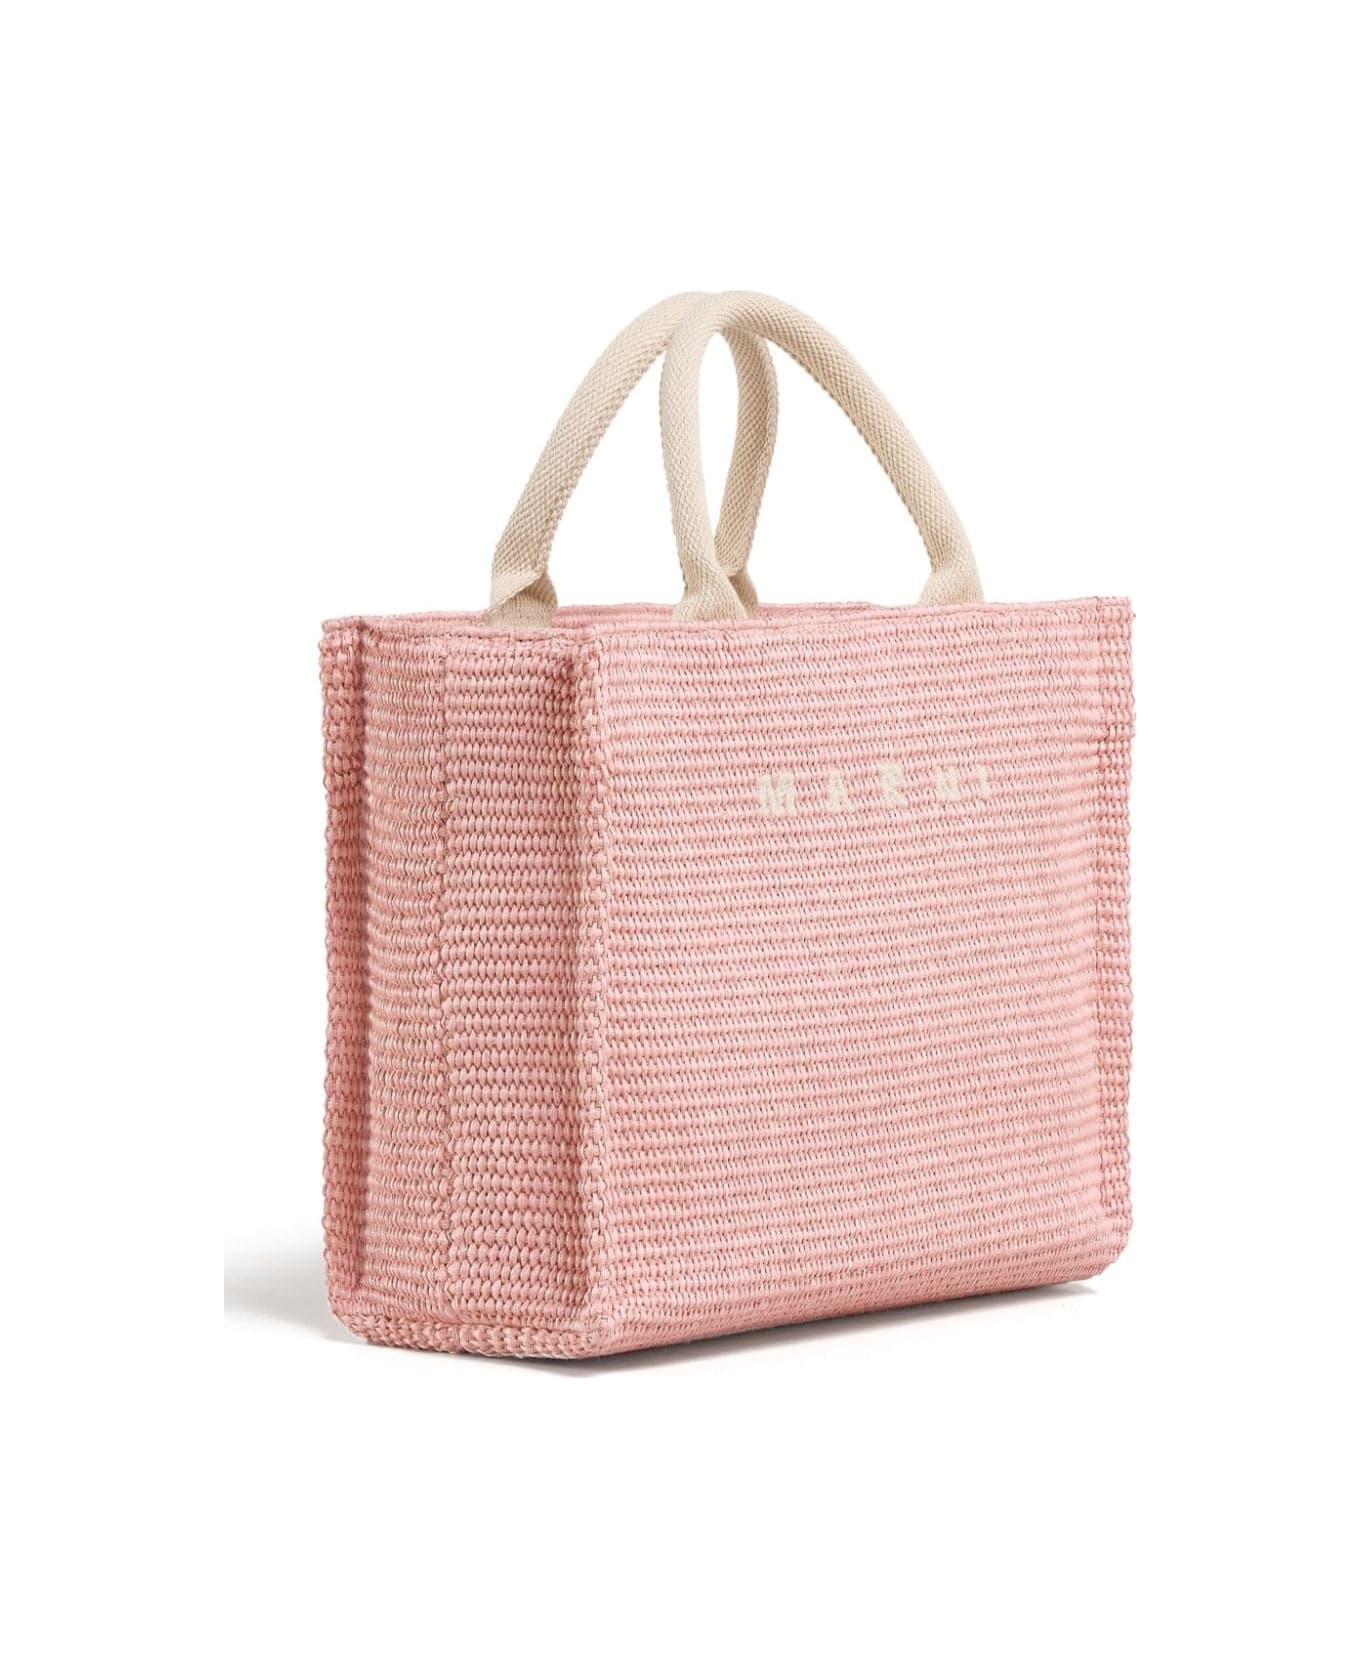 Marni Pink Tote Bag With Logo Embroidery In Rafia Effect Fabric Woman - Pink